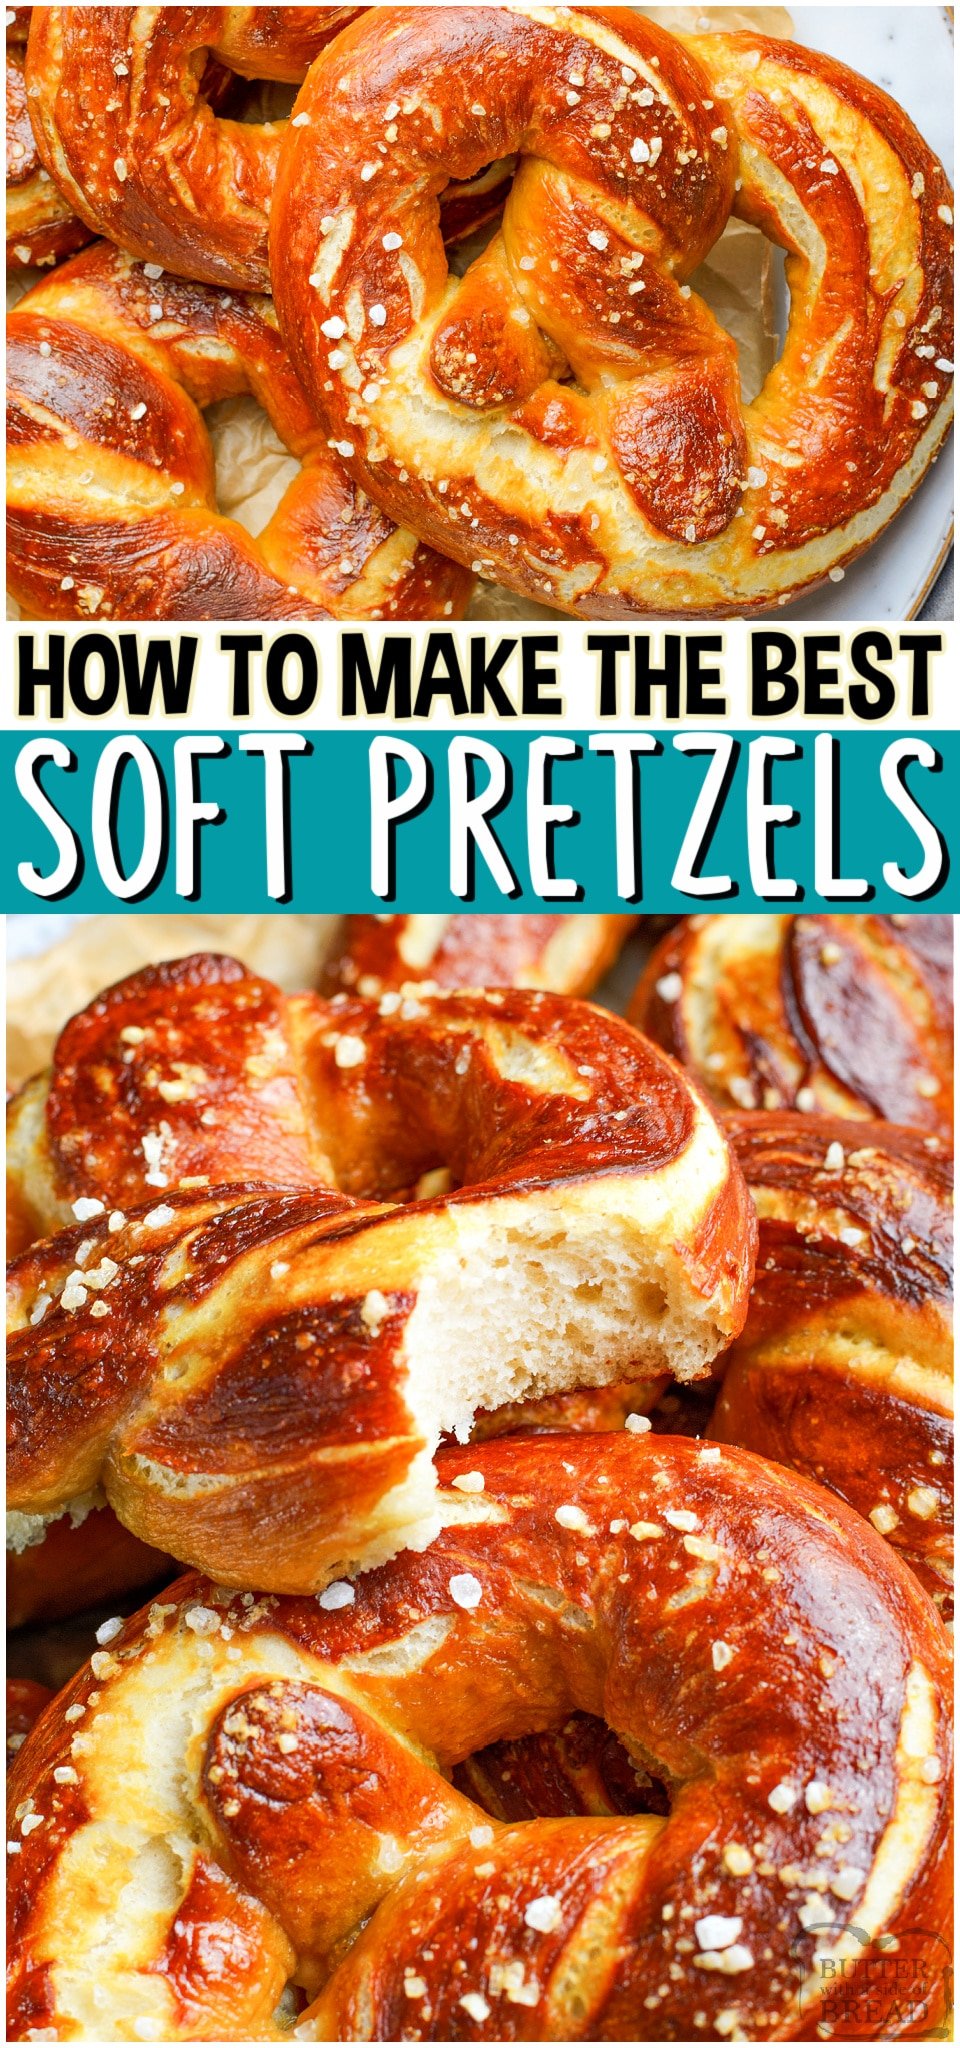 Homemade Soft Pretzels recipe made with pantry ingredients & SO delicious! Step-by-step instructions for how to make soft pretzels and an easy cheese sauce to dip! #pretzels #softpretzels #homemade #howtomake #easyrecipe from BUTTER WITH A SIDE OF BREAD